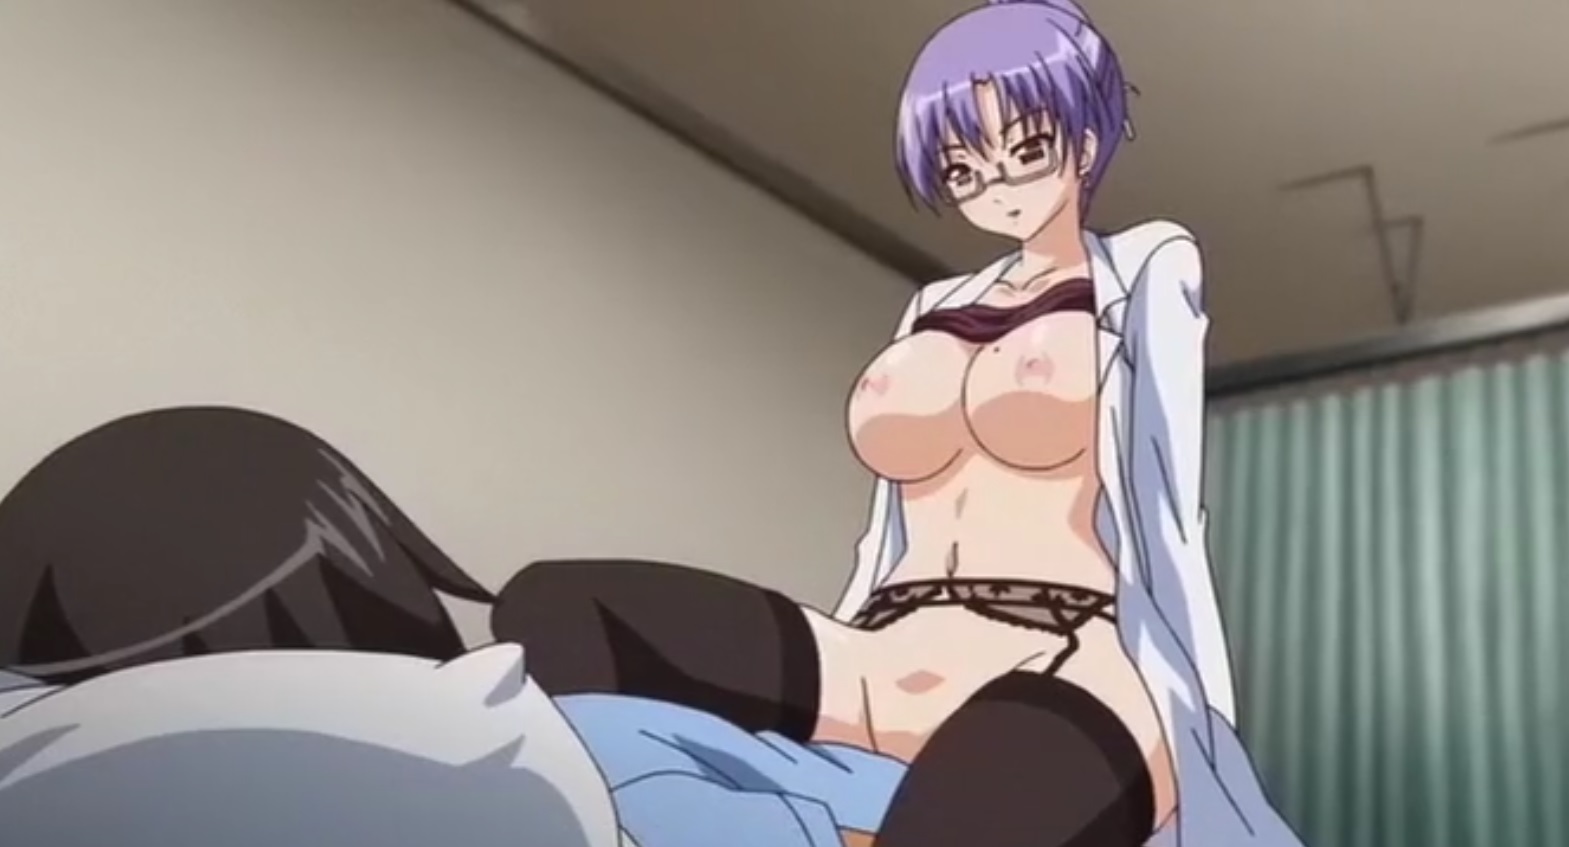 Anime Girl Sex In Office - Hot Office Hentai Video Fuck - HentaiVideo.tv